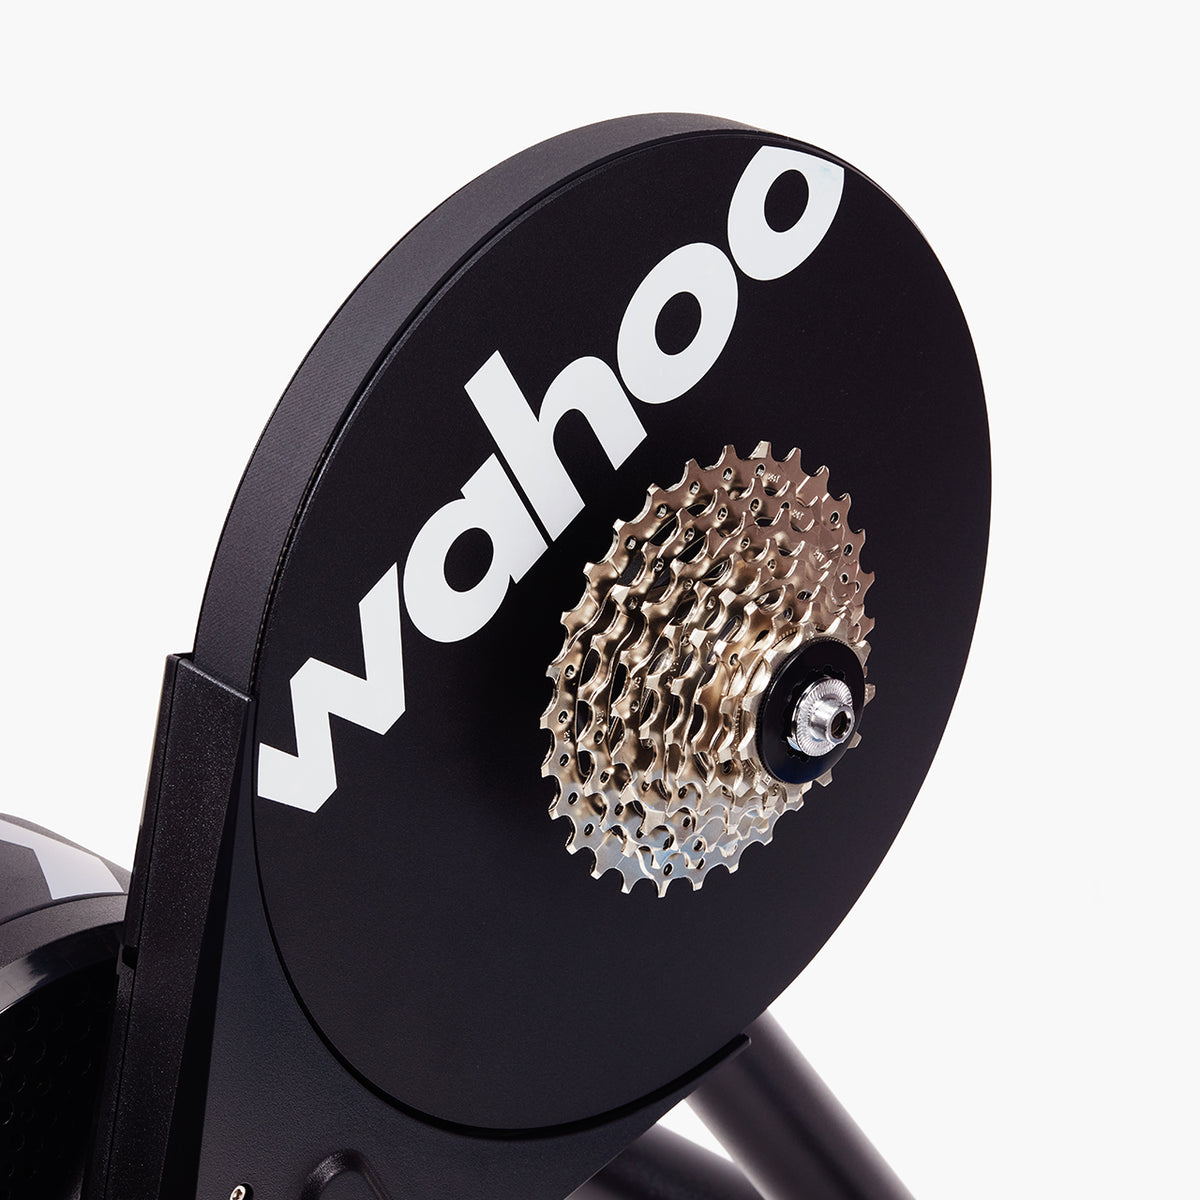 Wahoo KICKR CORE with 8-speed cassette